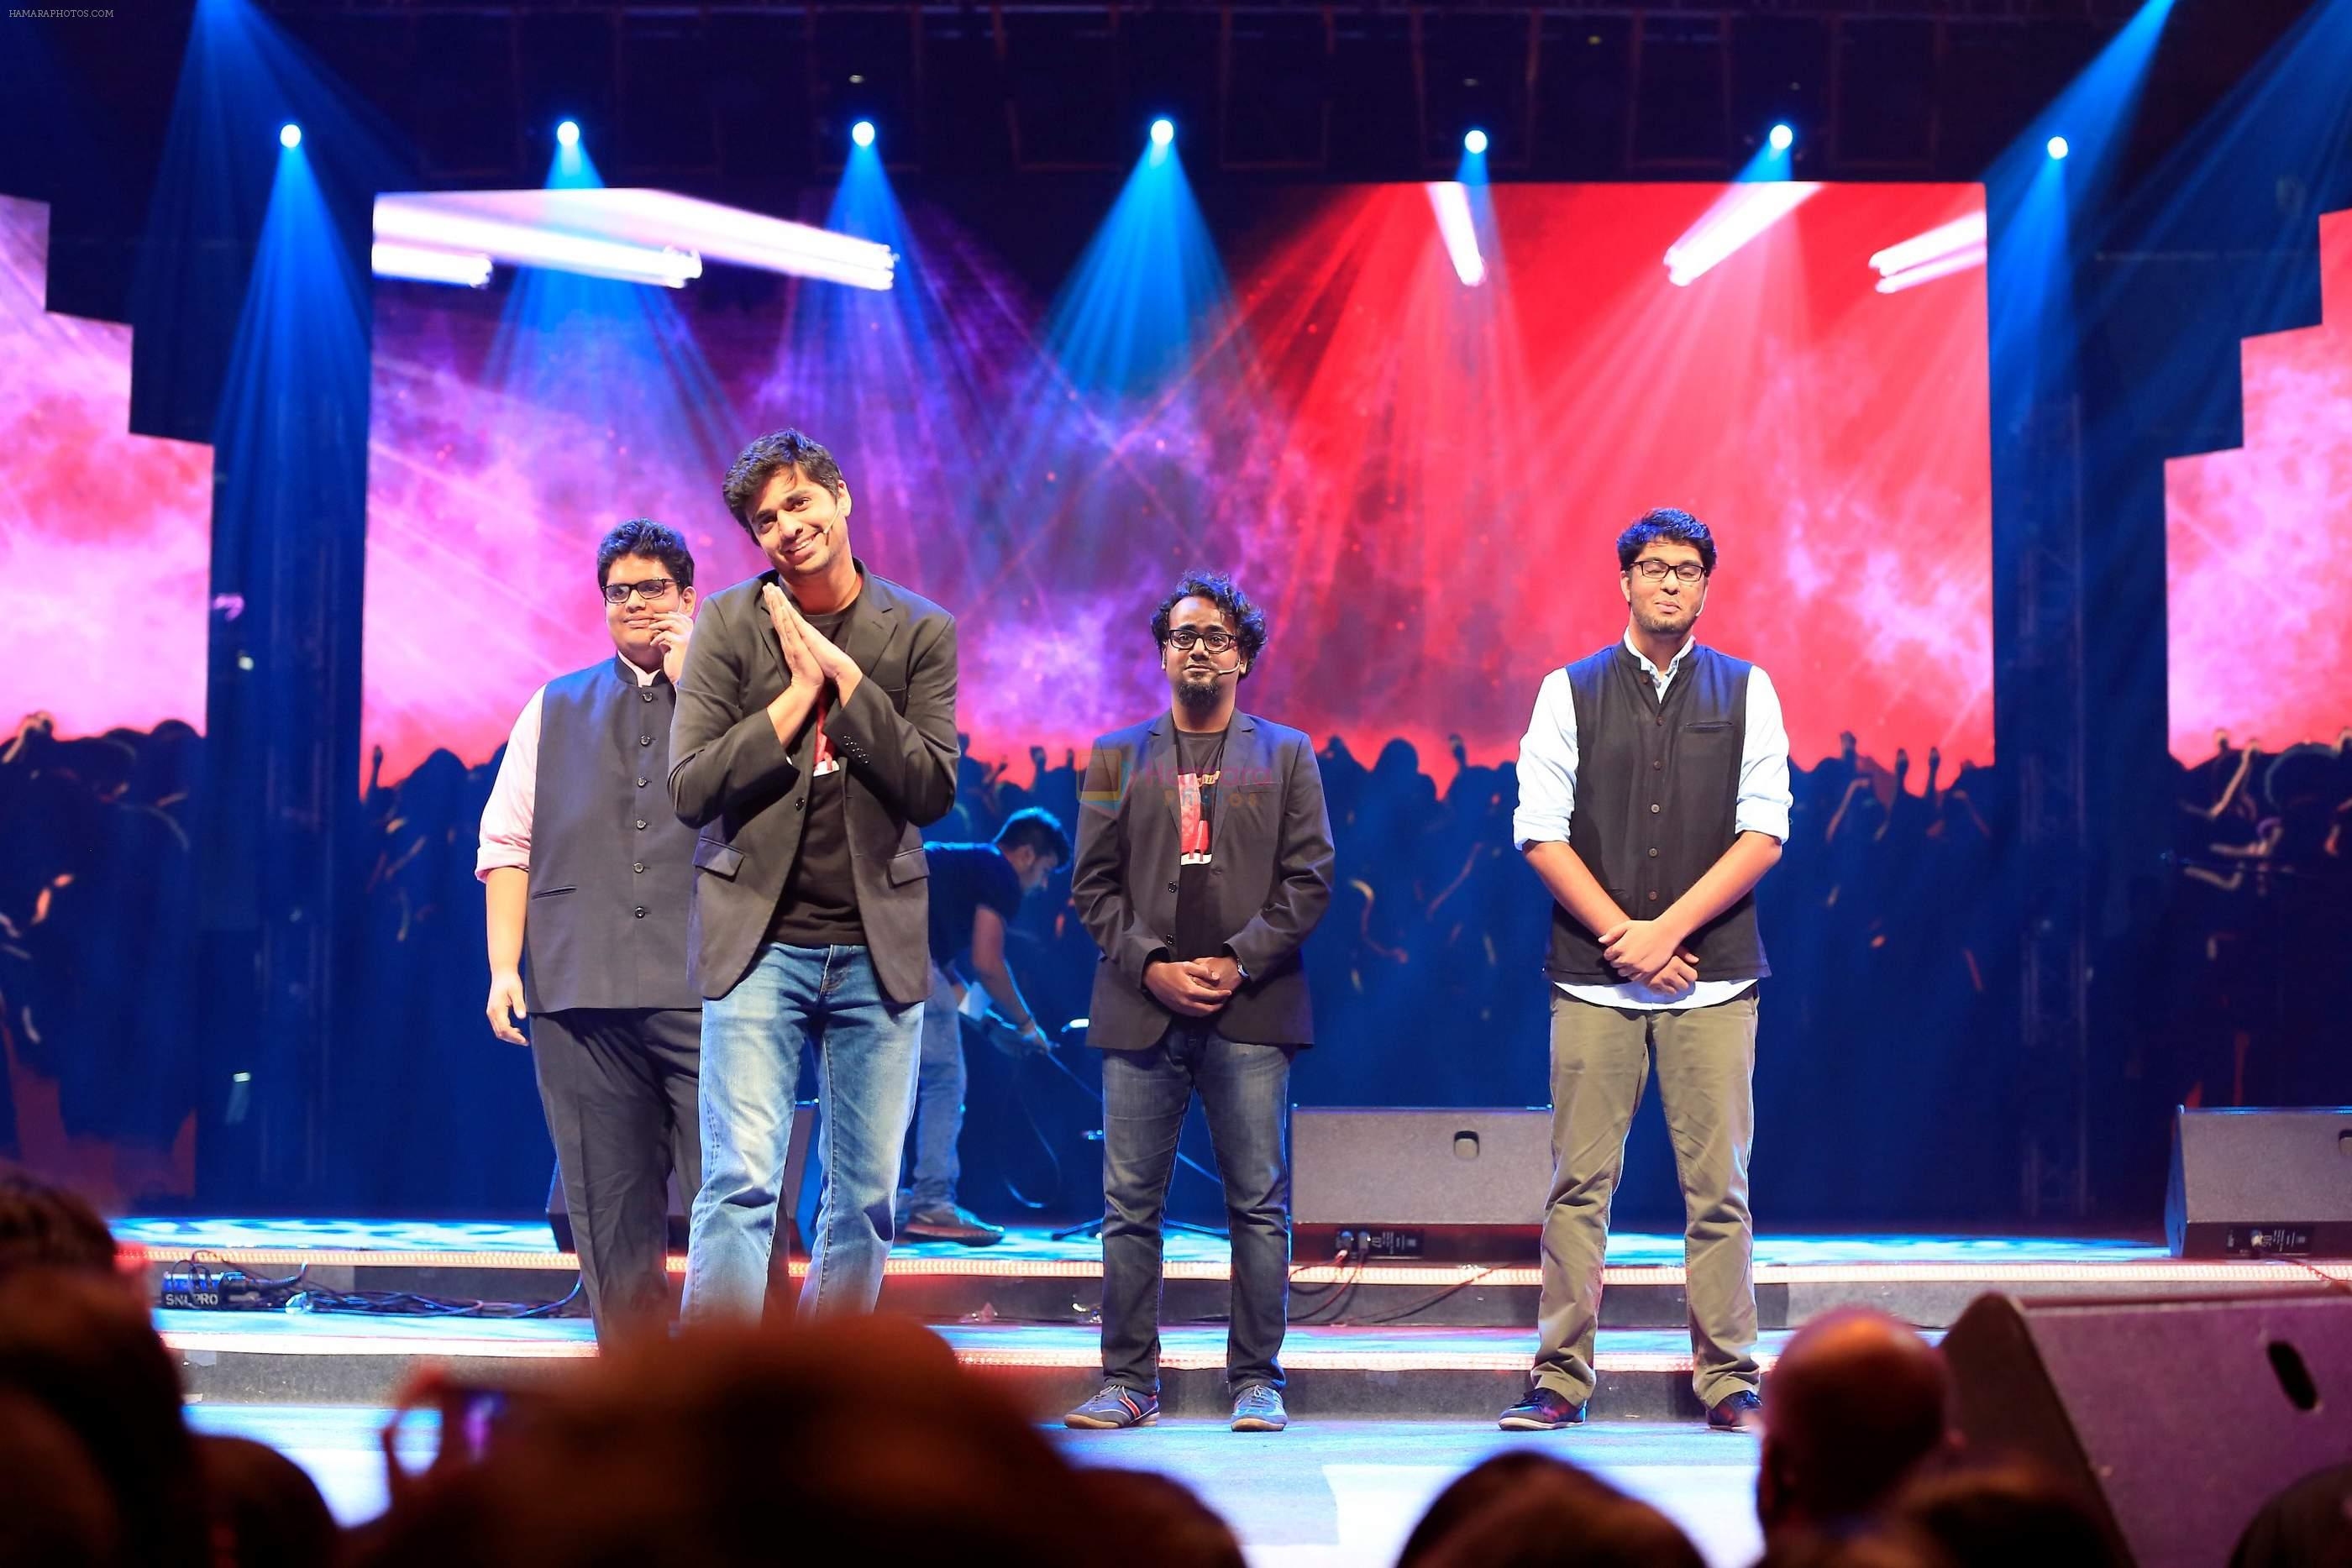 at YouTube FANFEST on 18th March 2016